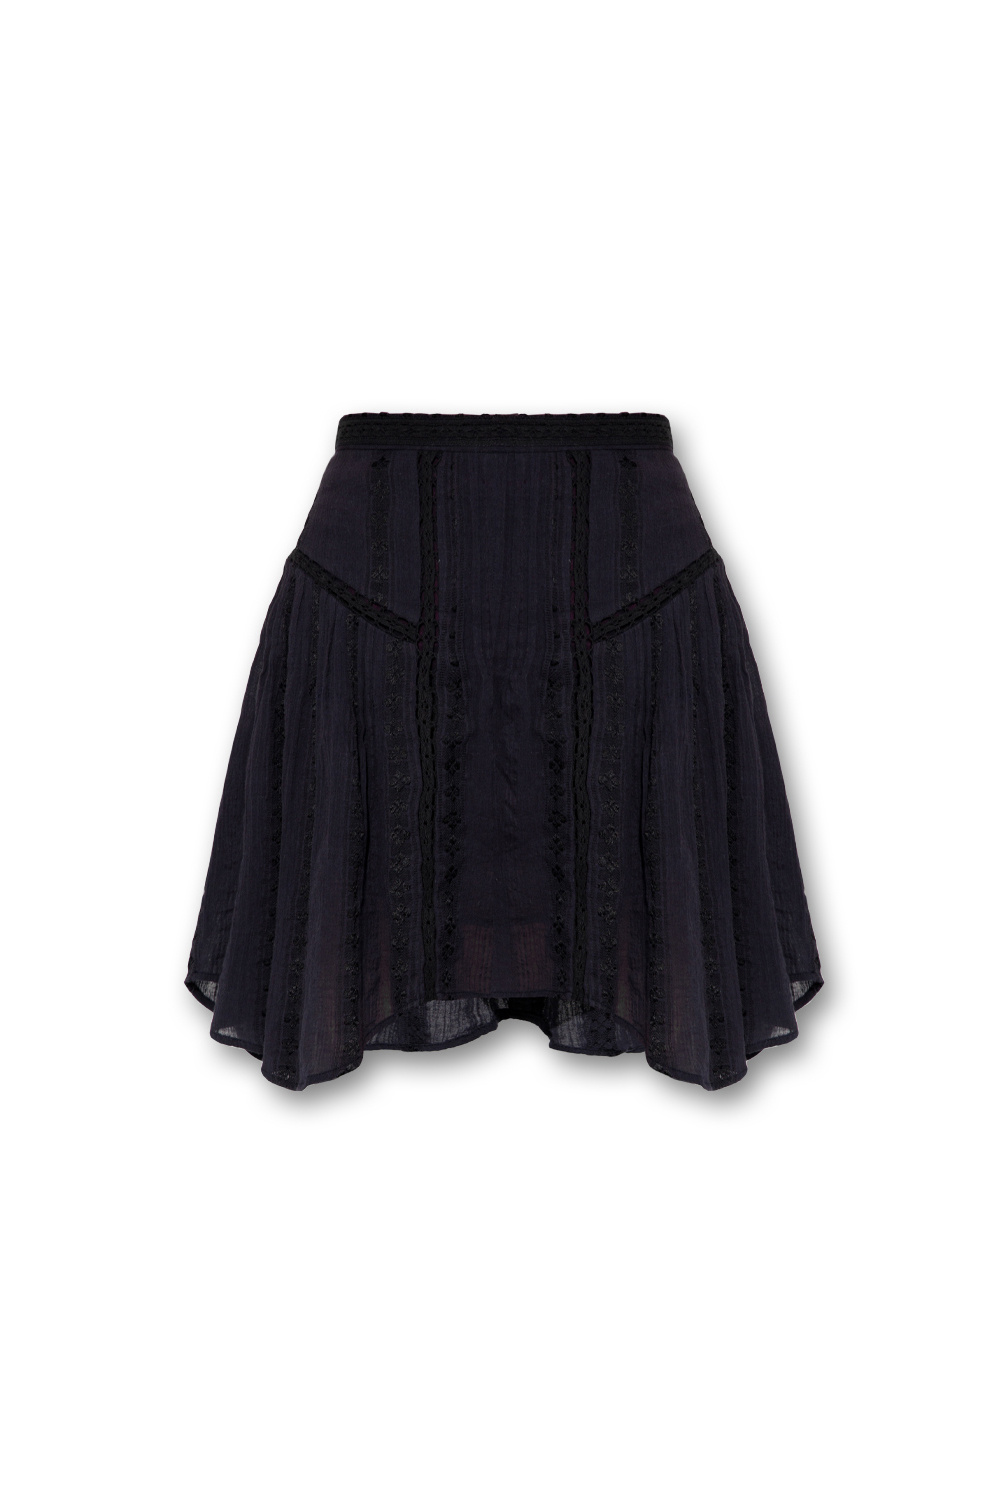 Download the latest version of the app ‘Jorena’ cotton skirt